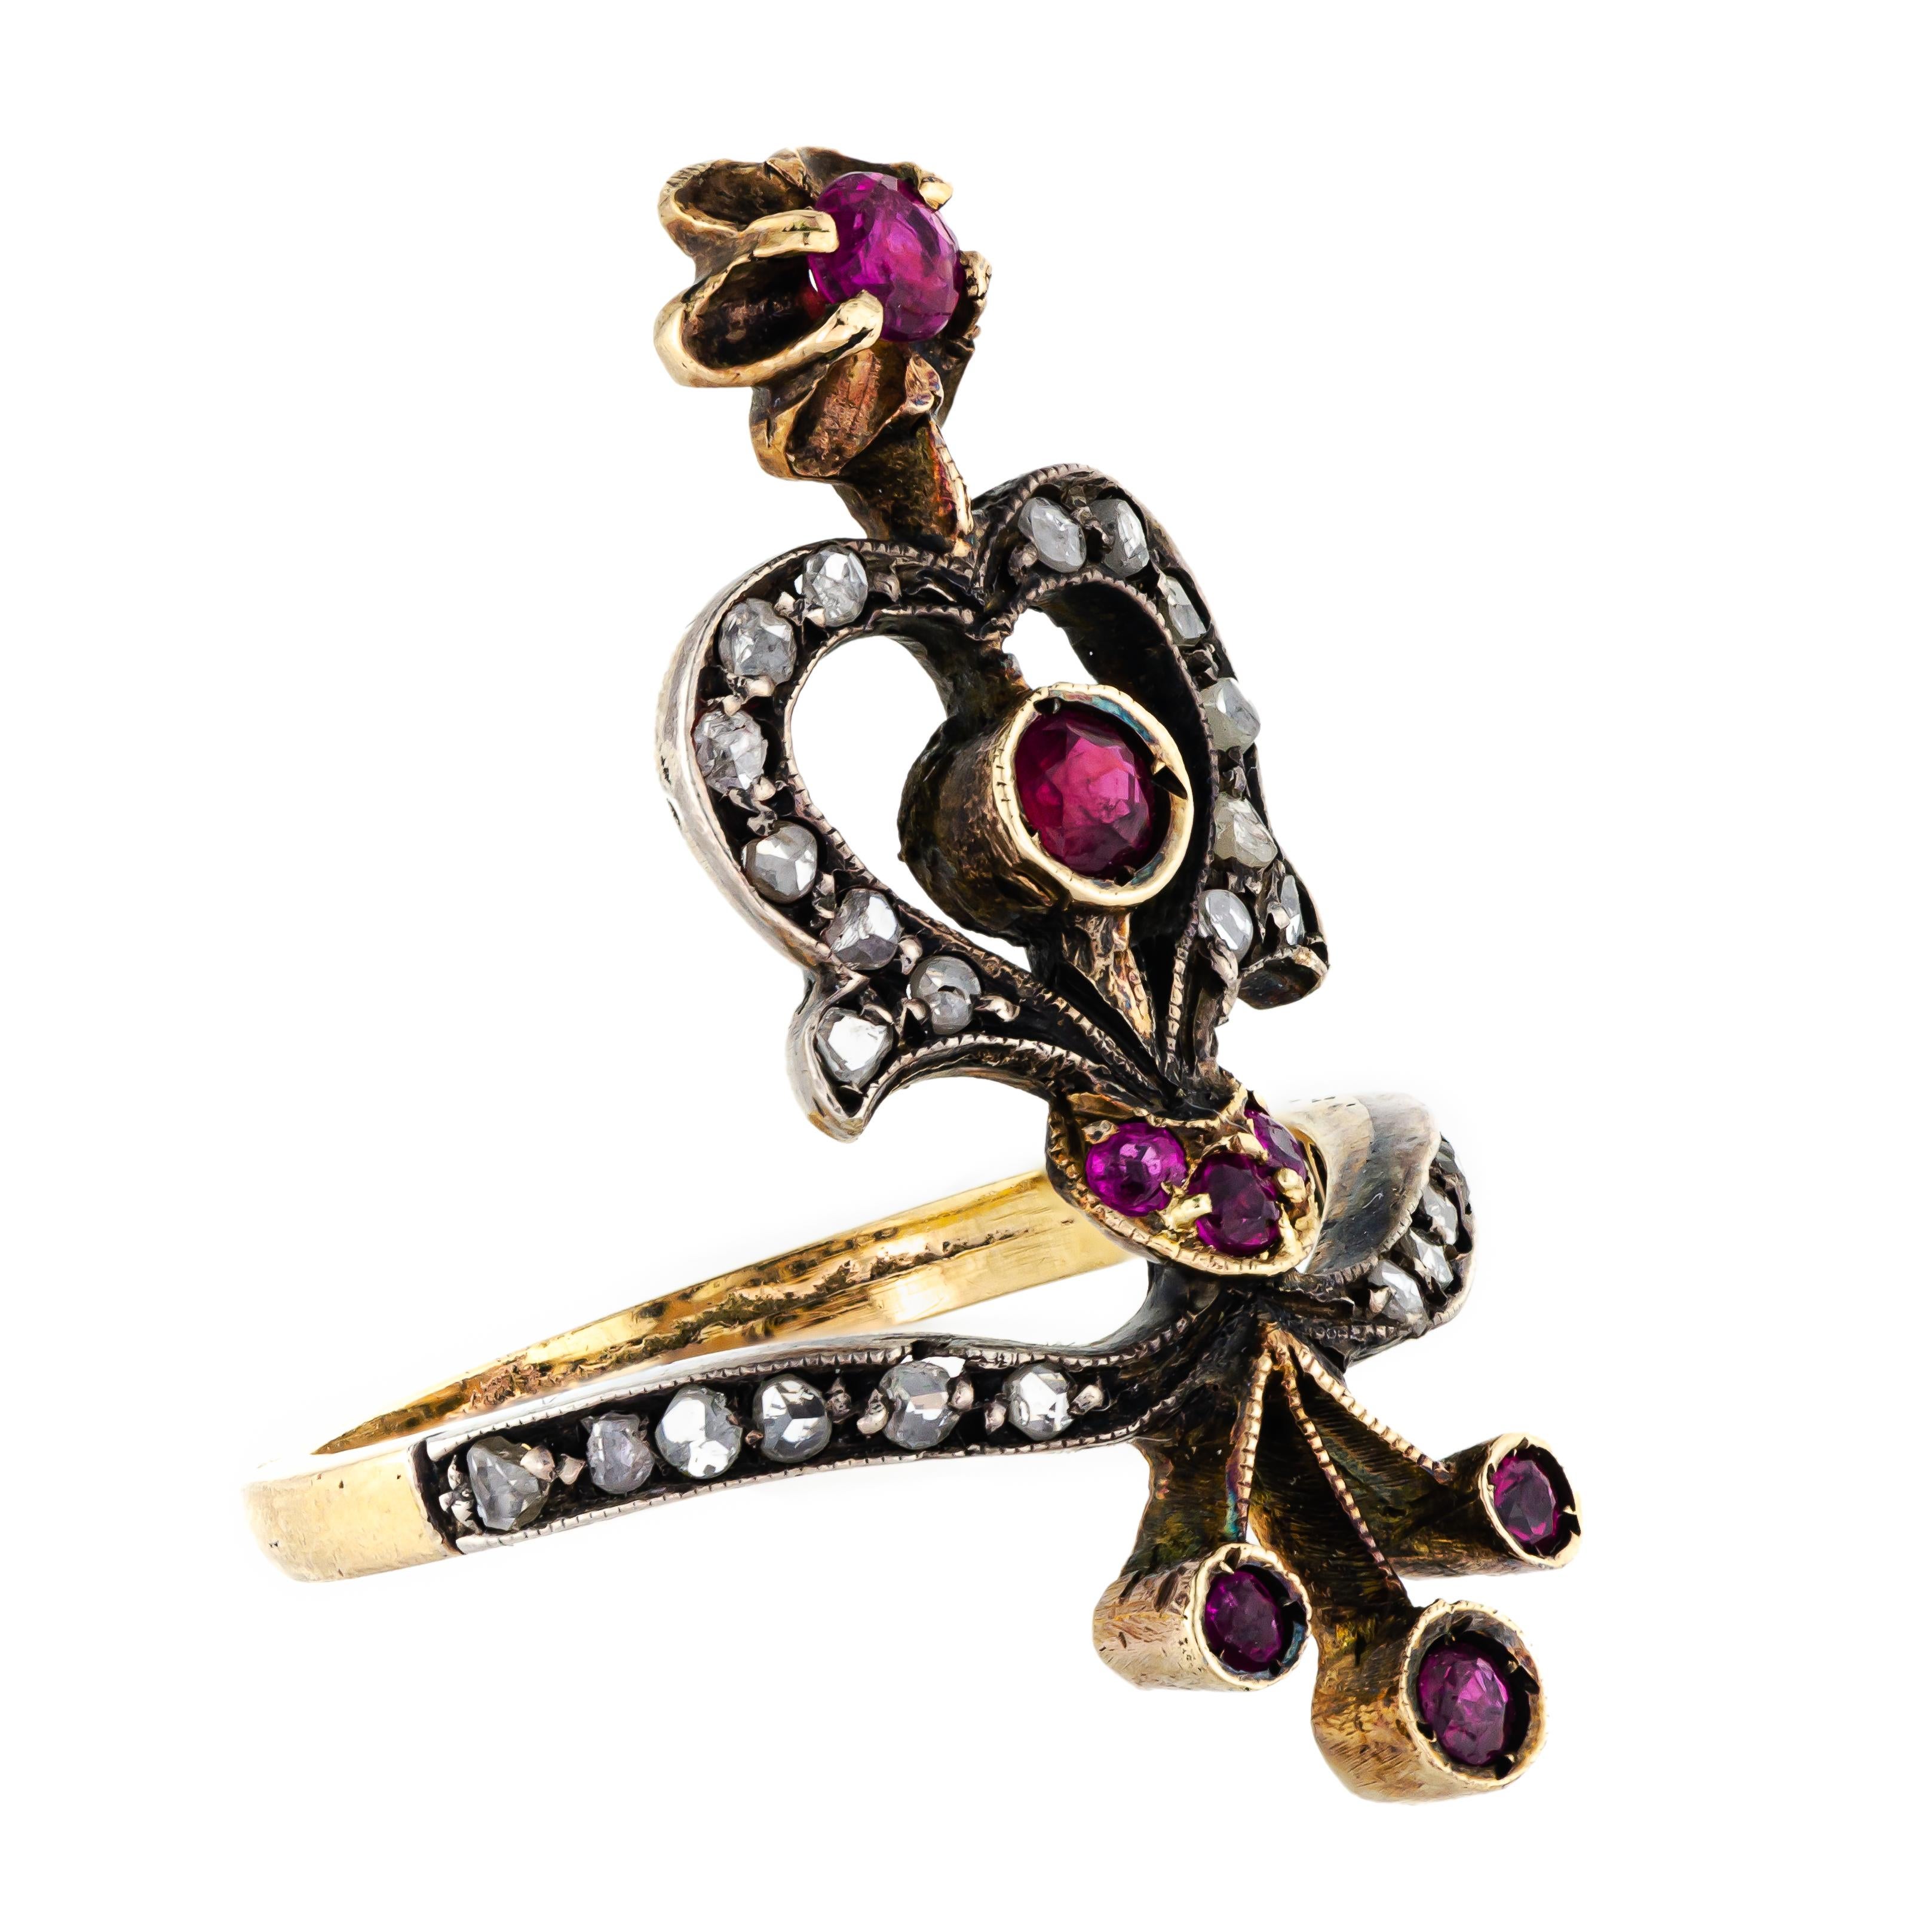 Victorian long ring of a floral spray design silver-topped yellow gold set with rose-cut diamonds and round rubies. Currently, a size 7 3/4 but can be sized